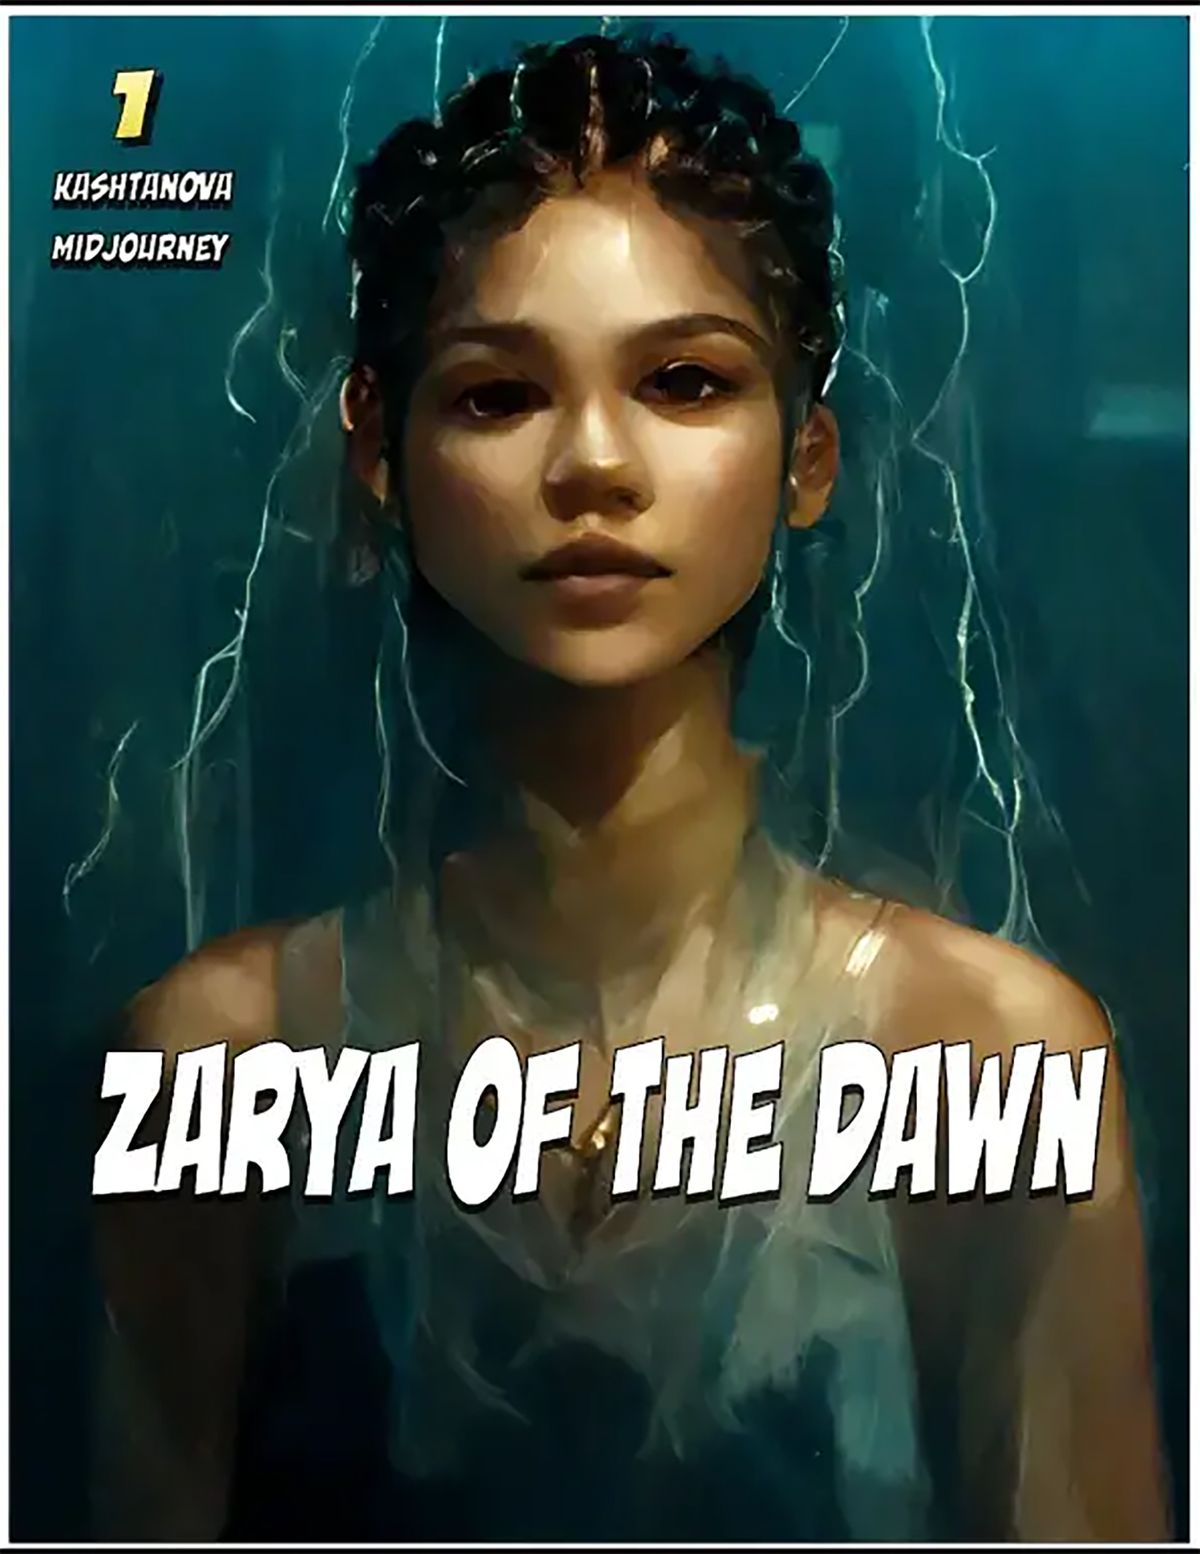 Detail from the cover for the comic book, Zarya of the Dawn (2023), whose author, Kris Kashtanova, used the AI-powered text-to-image generator Midjourney to create the illustrations. She was granted copyright in the book but not its AI-generated images

Courtesy Kris Kashtanova